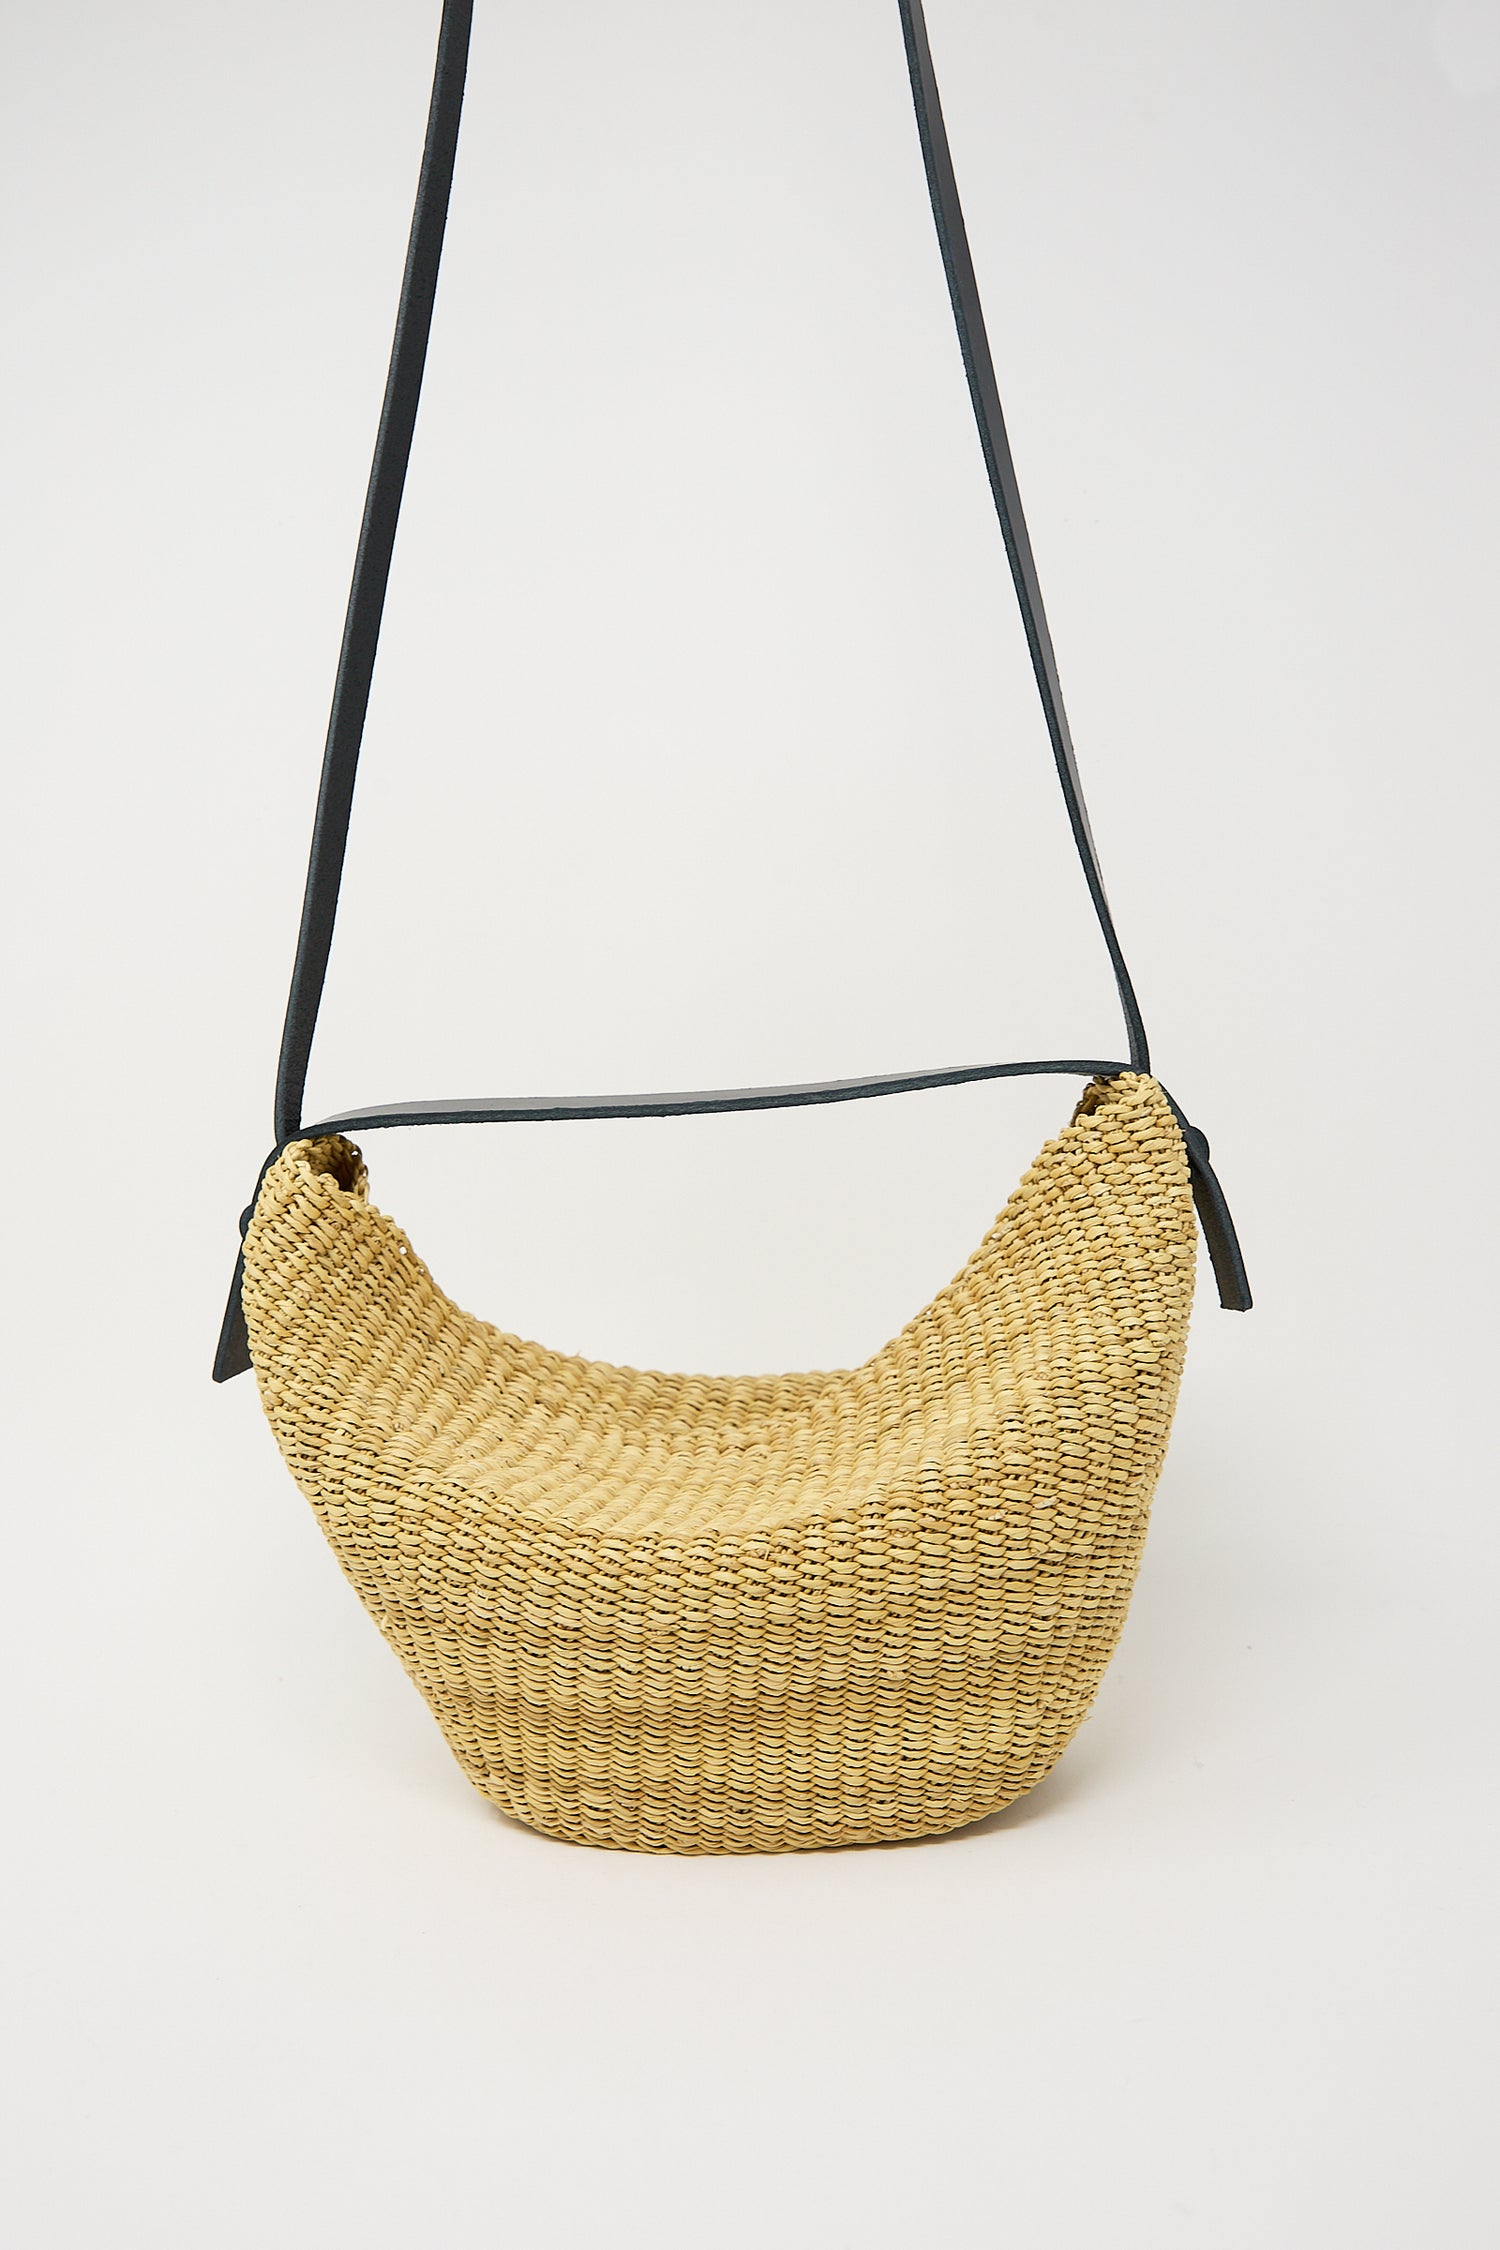 A handwoven straw N. 35 Mini Croissant Bag in Natural suspended from a thin black stand against a white background by Inès Bressand.